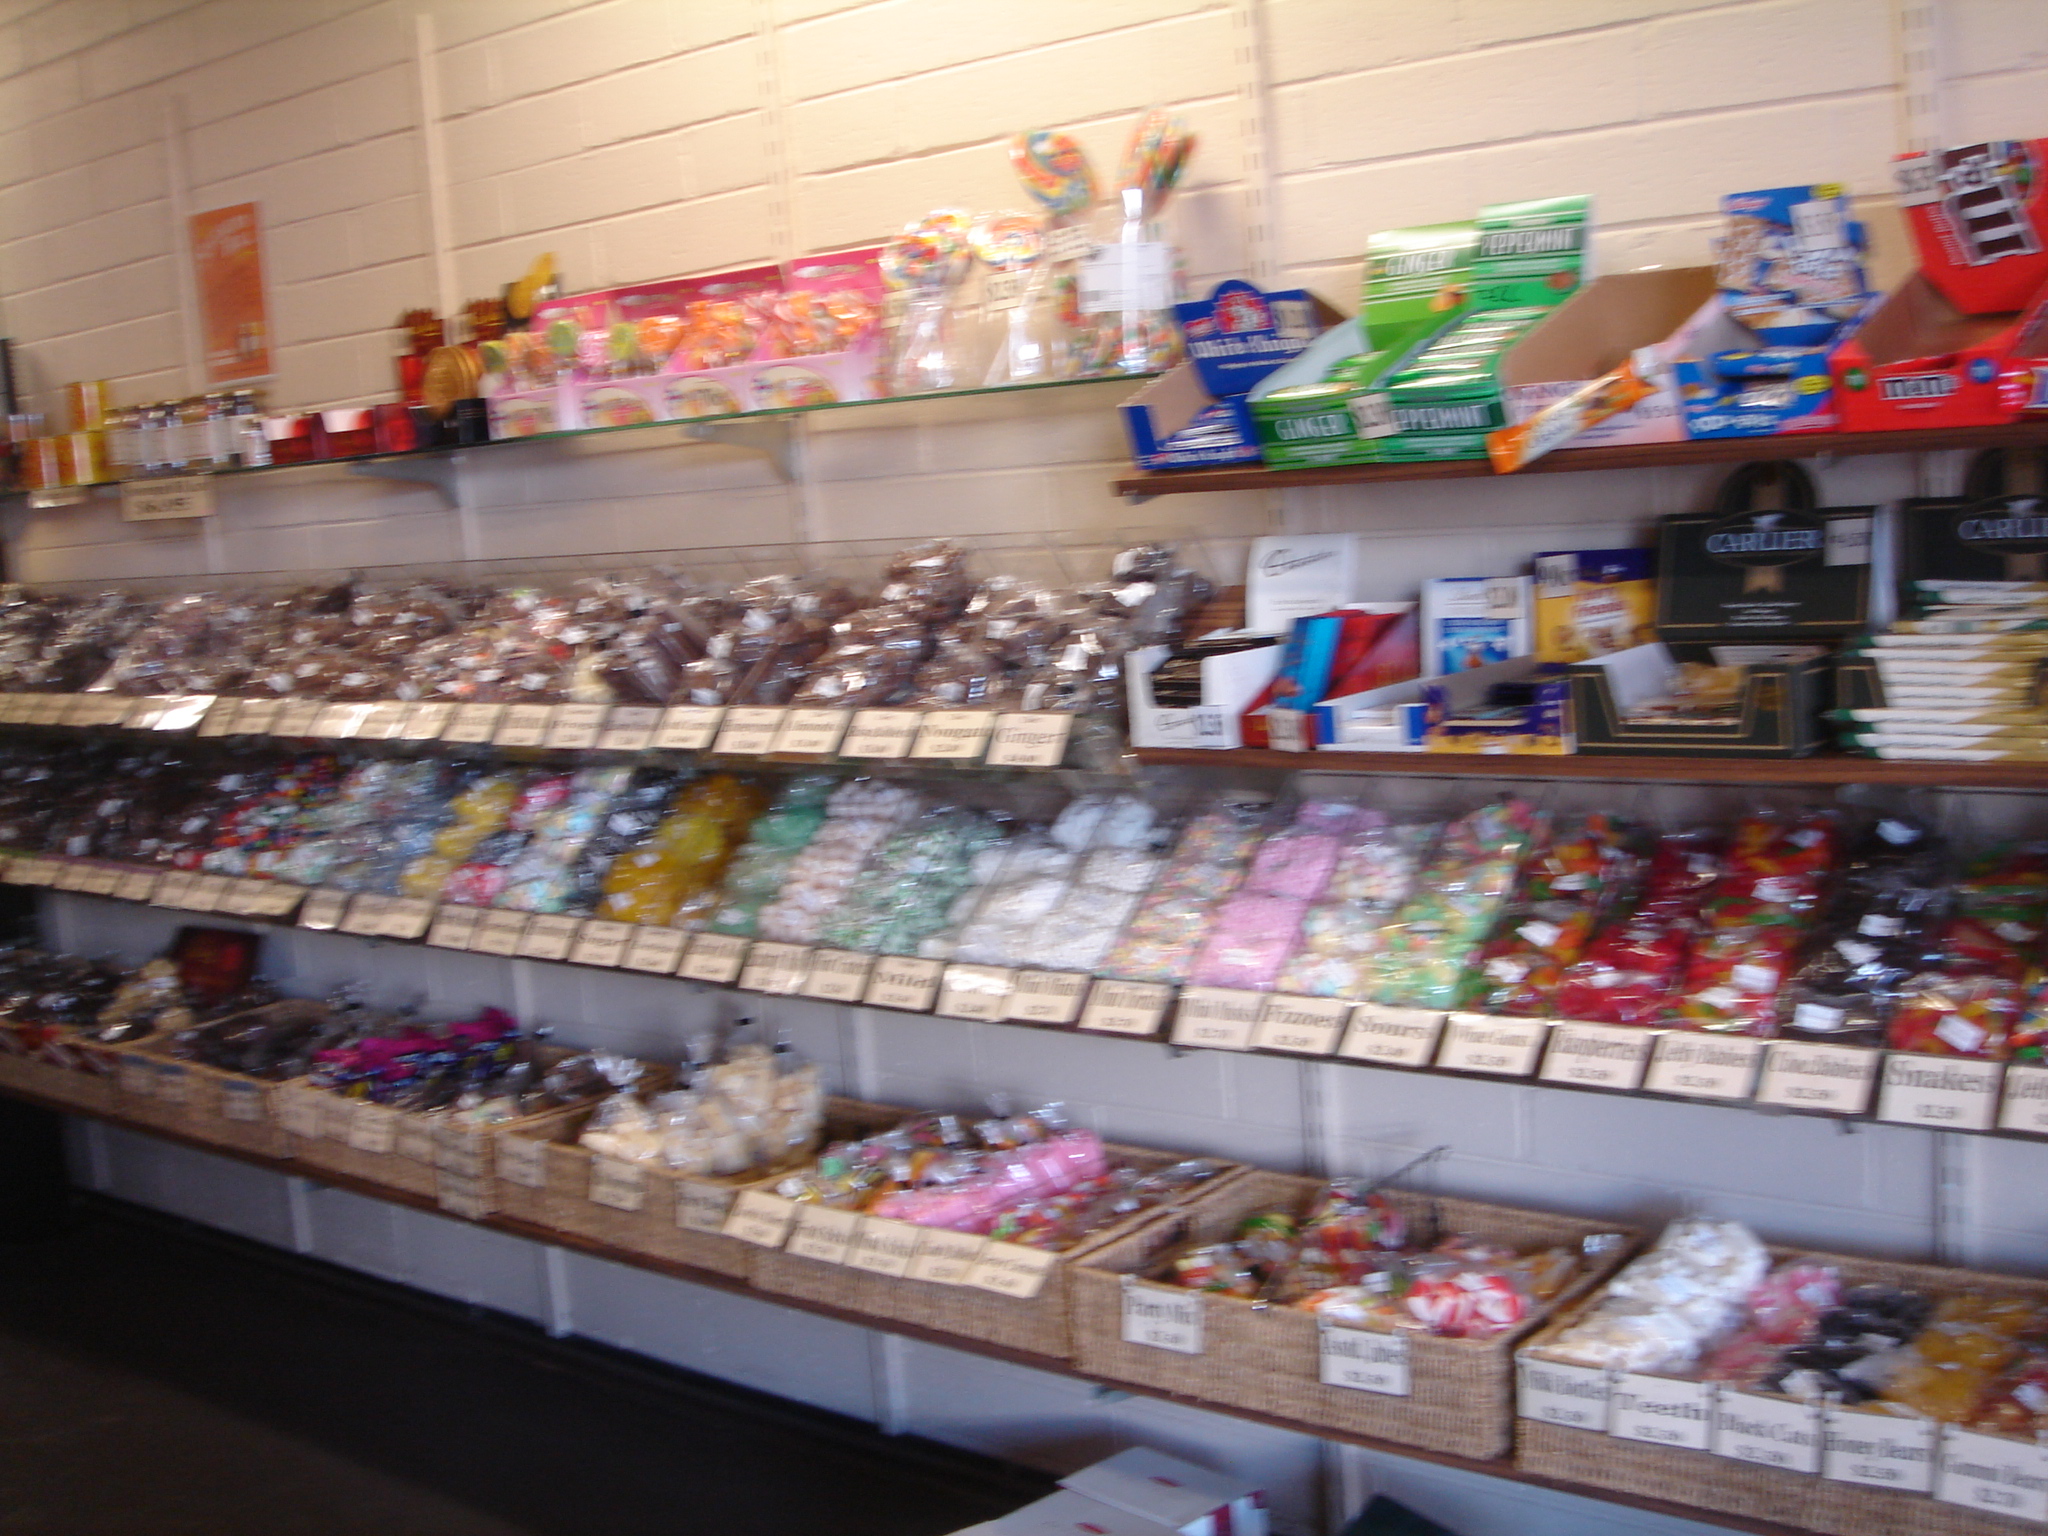 Our Range Of Chocolate & Confectionery